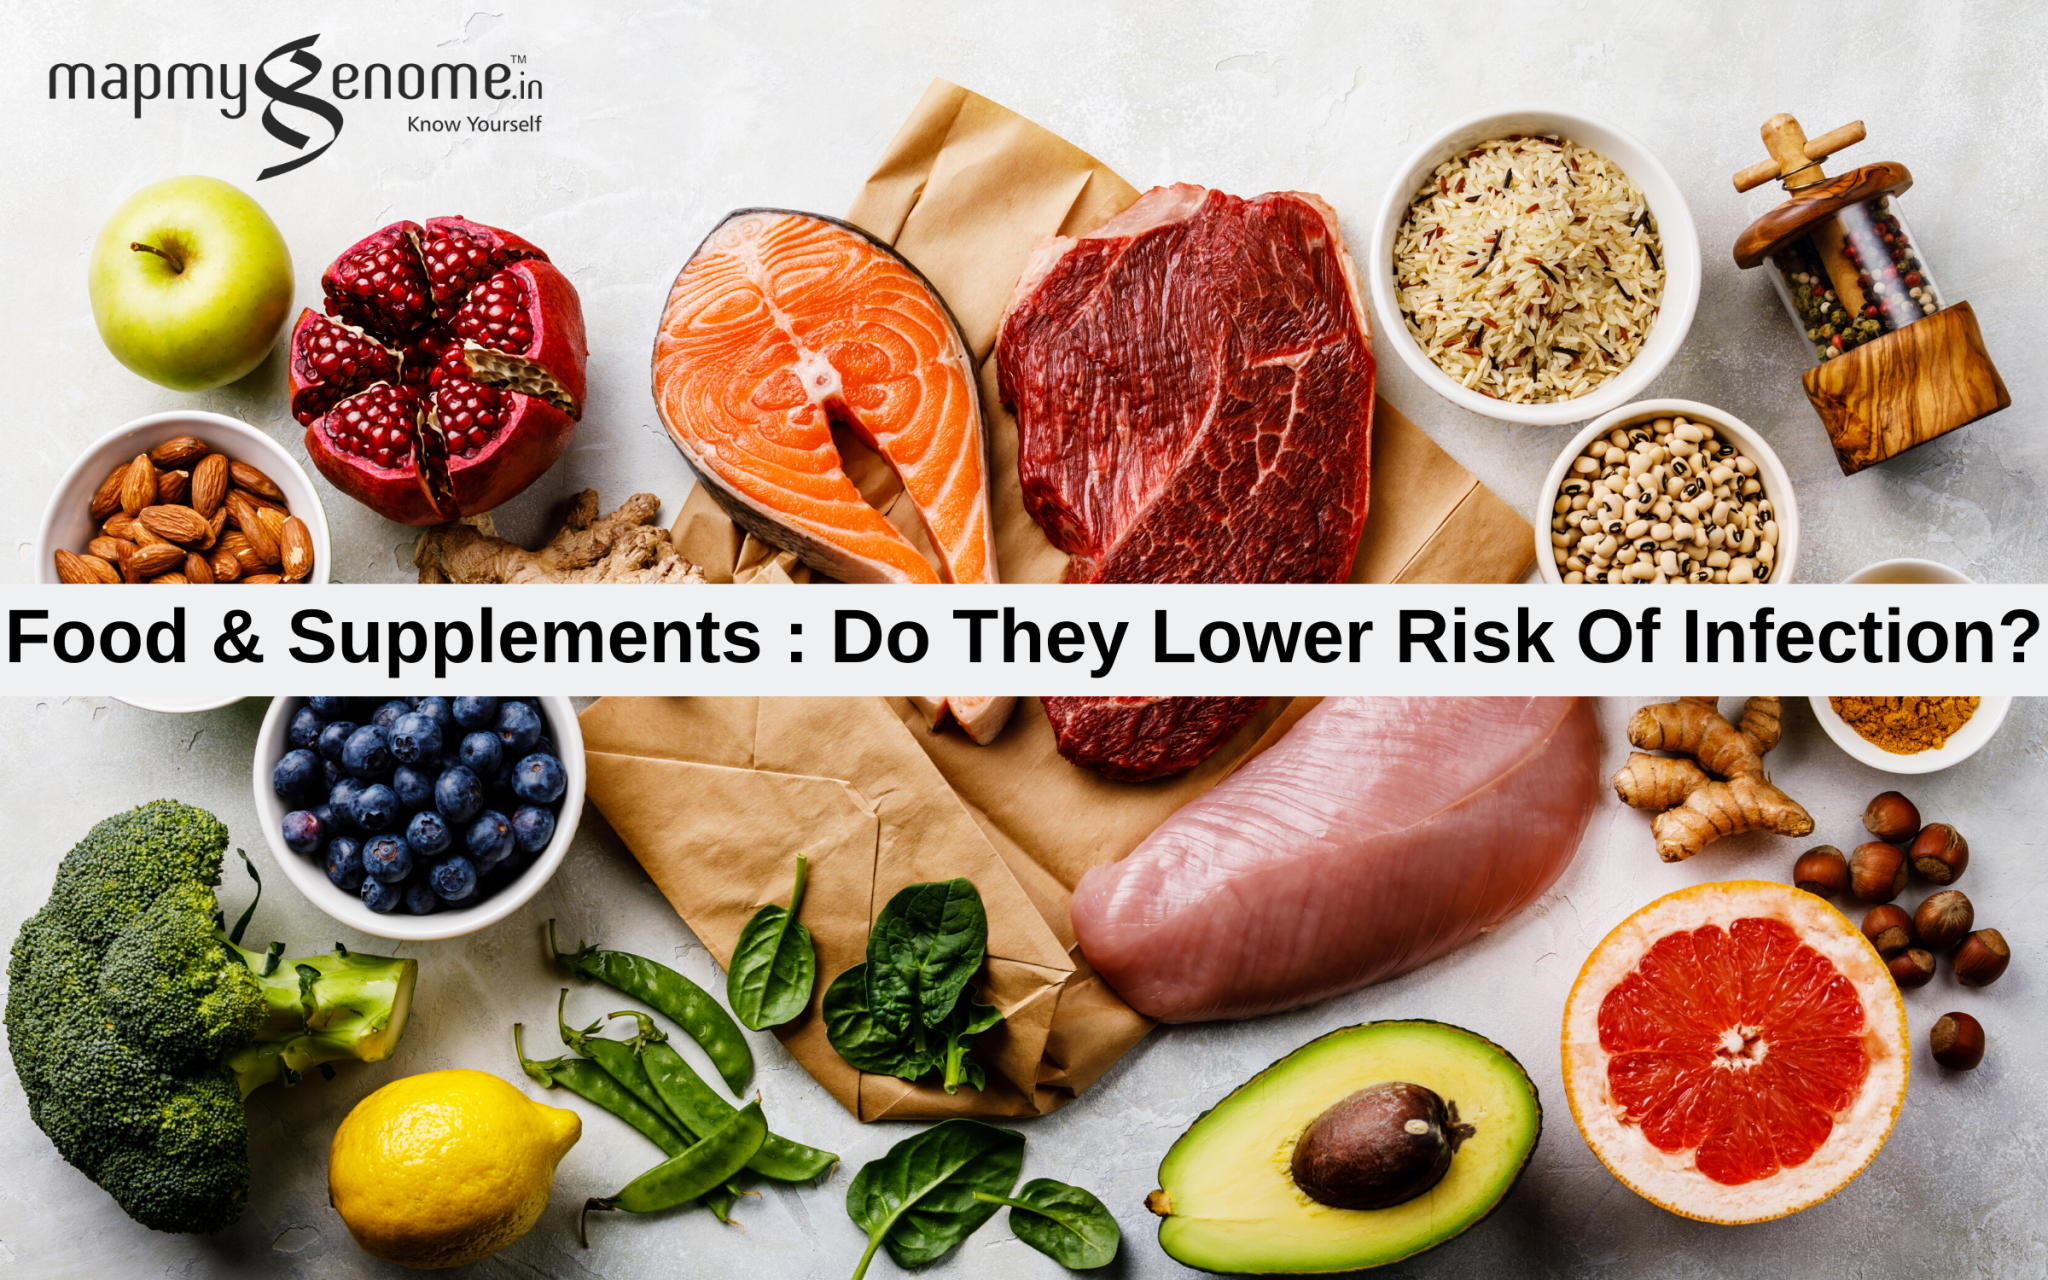 Food & Supplements : Do They Lower Risk Of Infection?